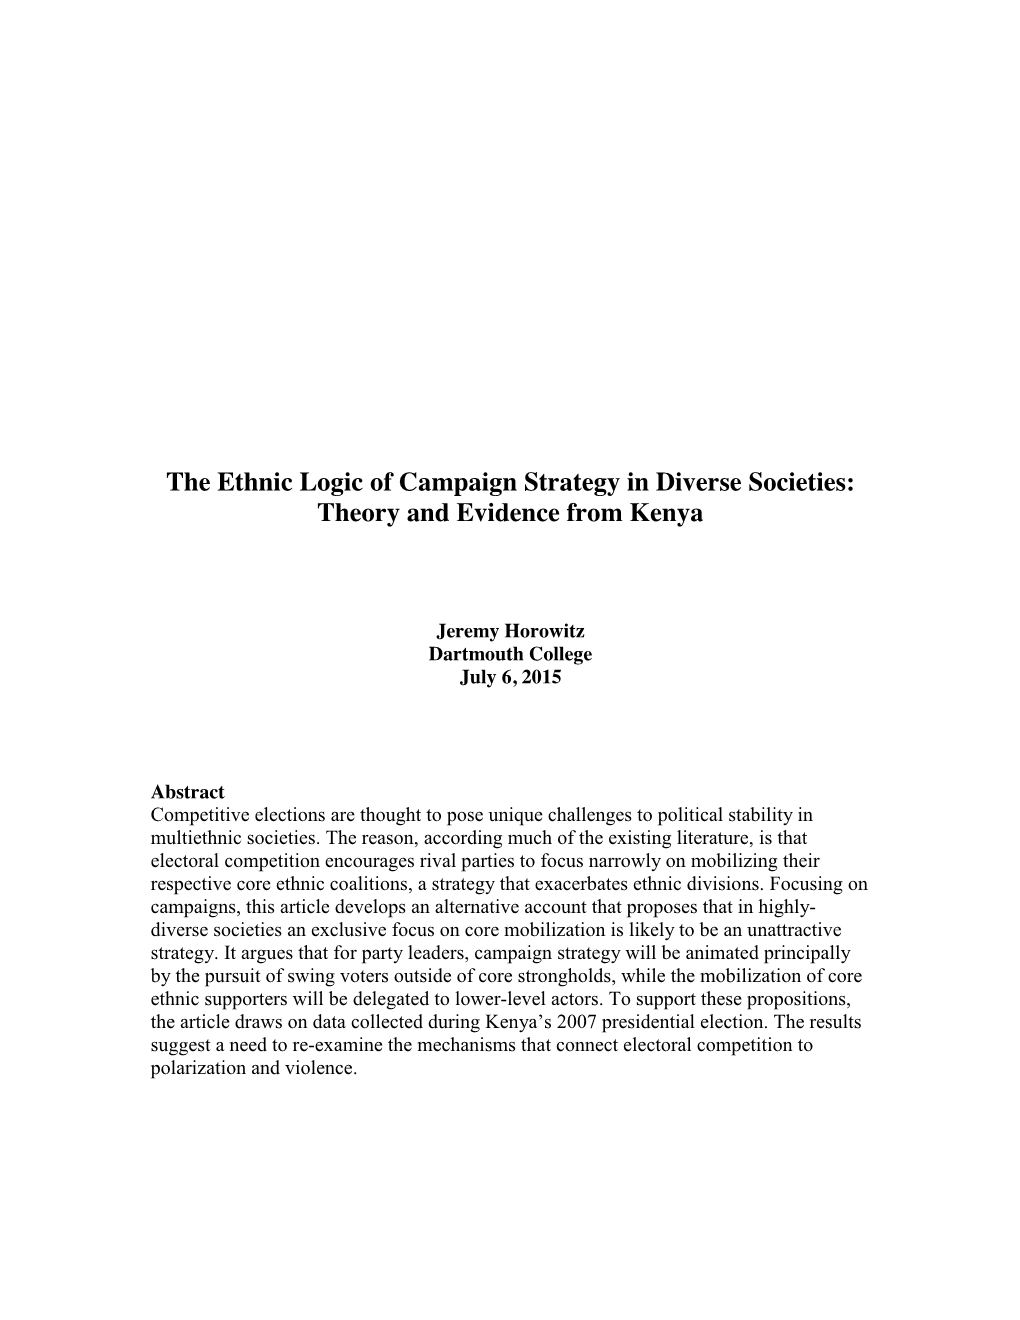 The Ethnic Logic of Campaign Strategy in Diverse Societies: Theory and Evidence from Kenya